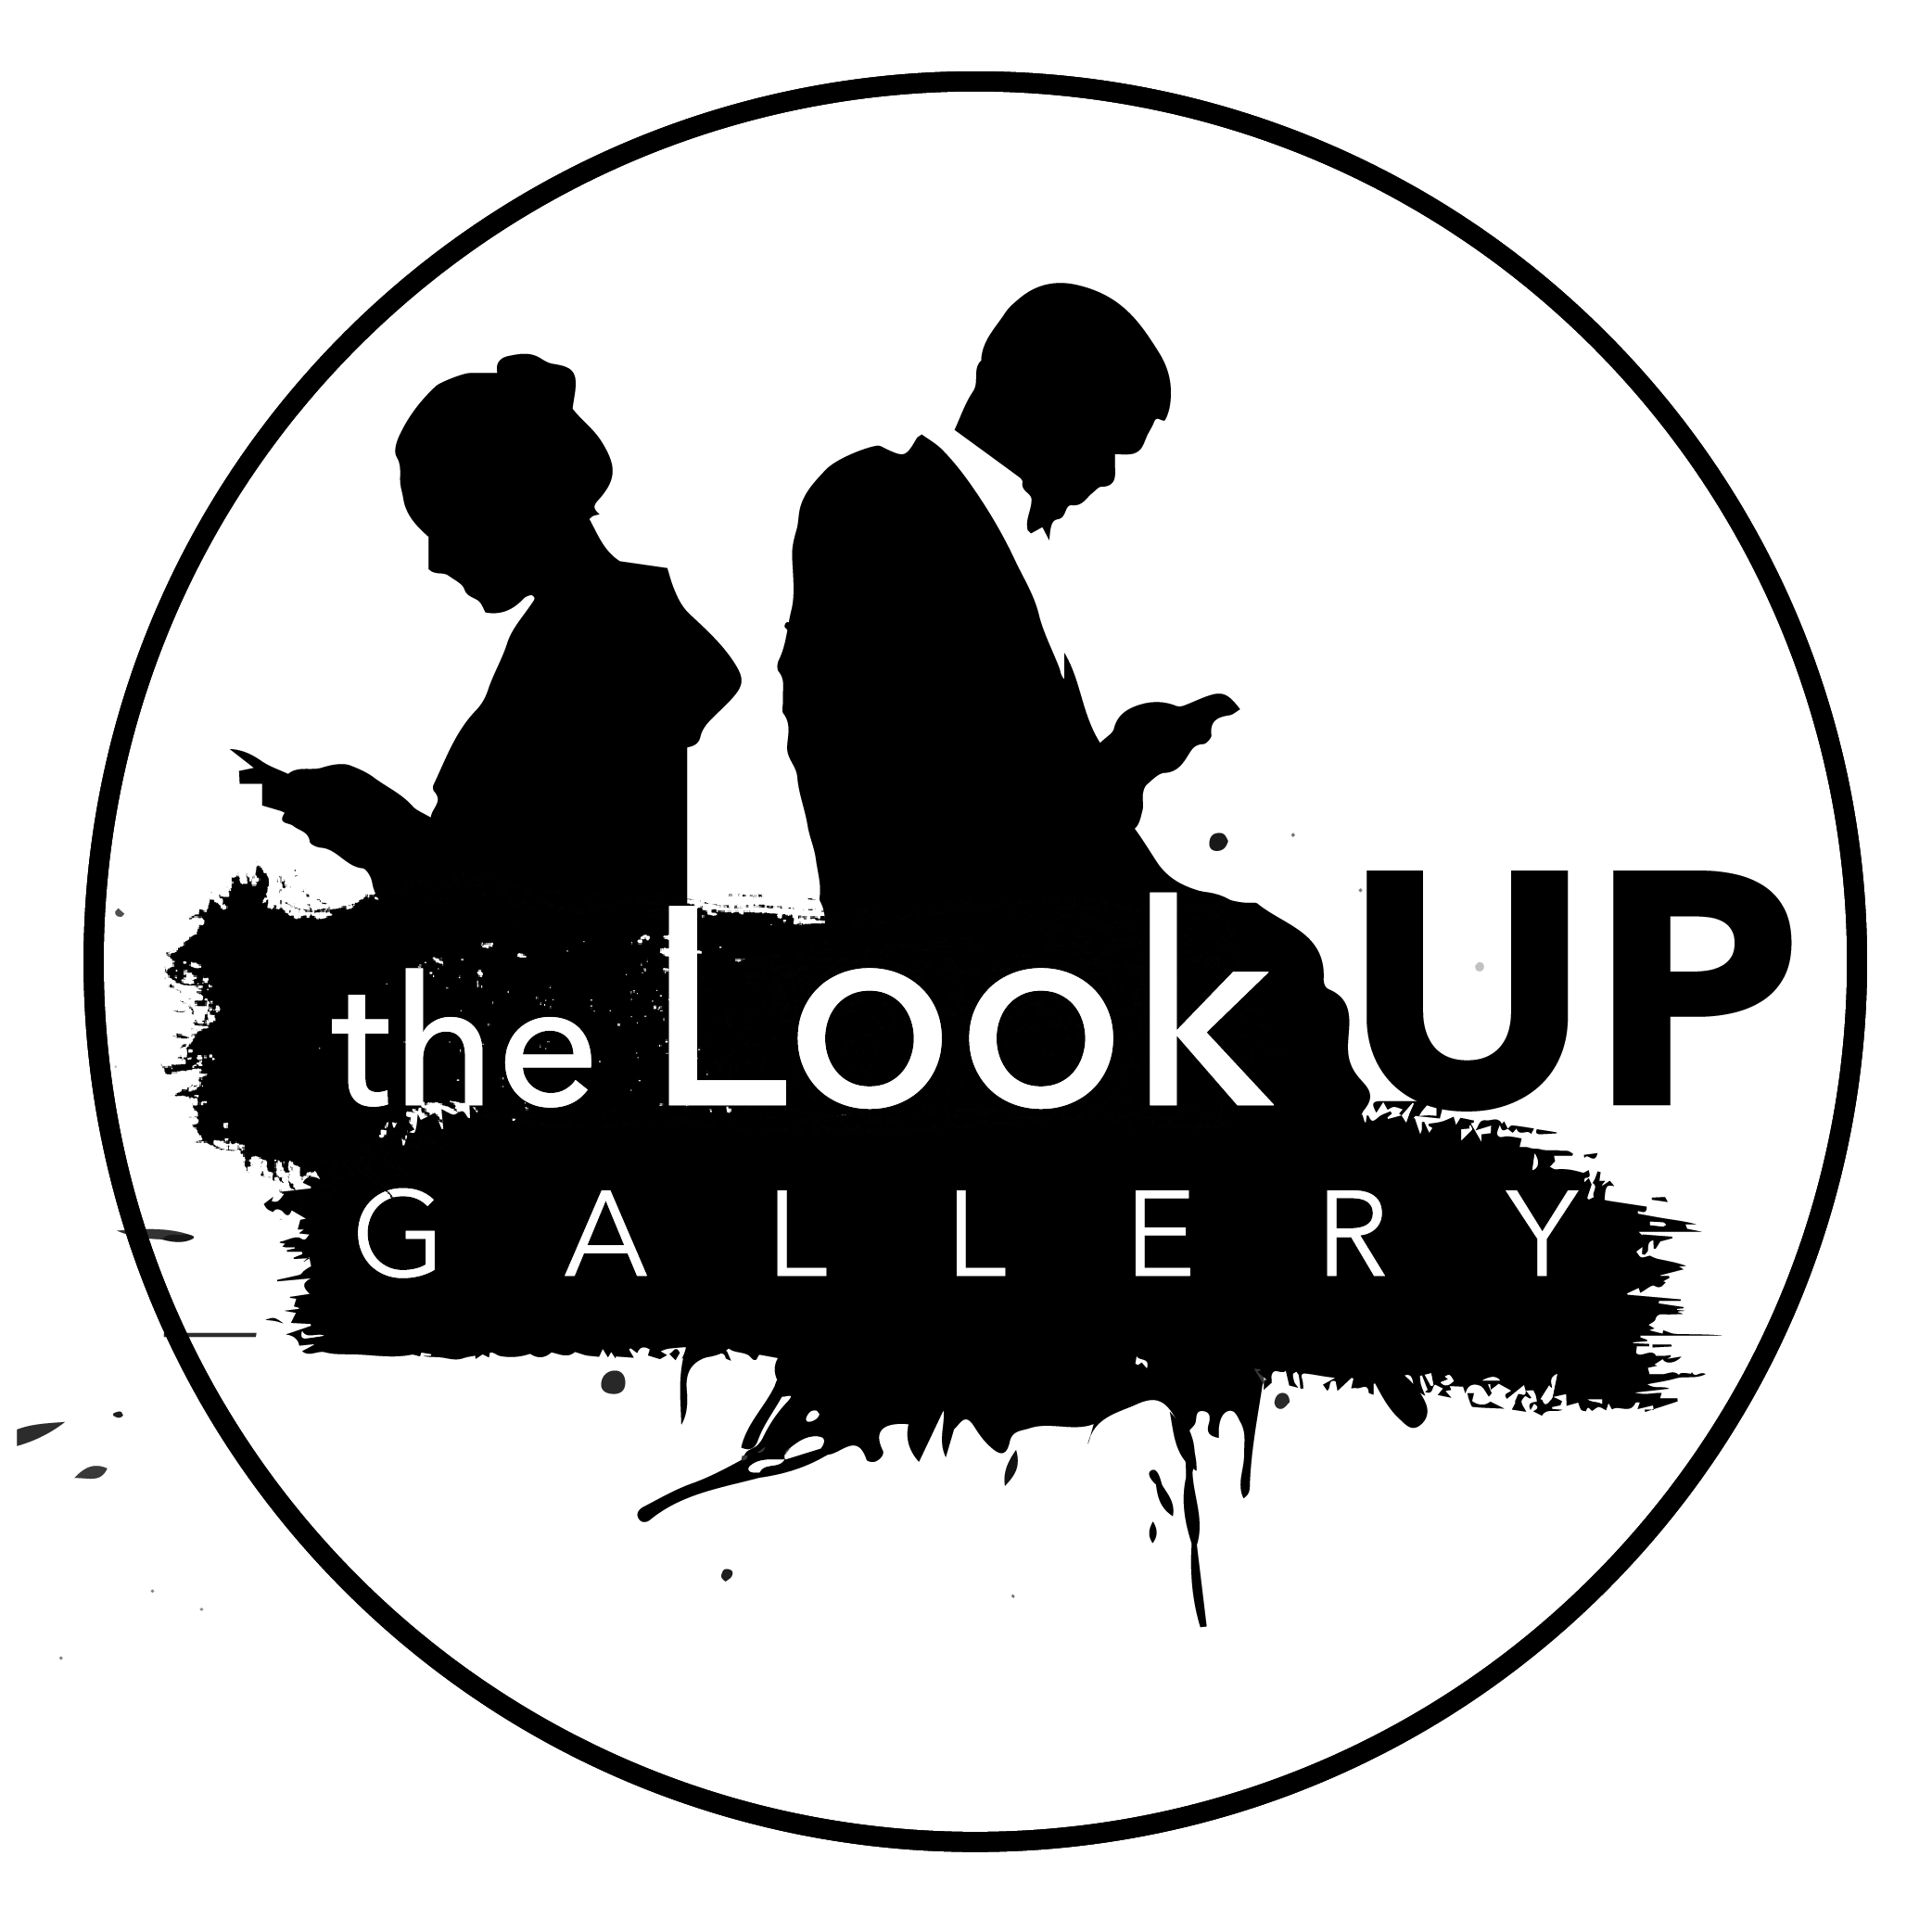 The Look Up Gallery presenting New artist in June!